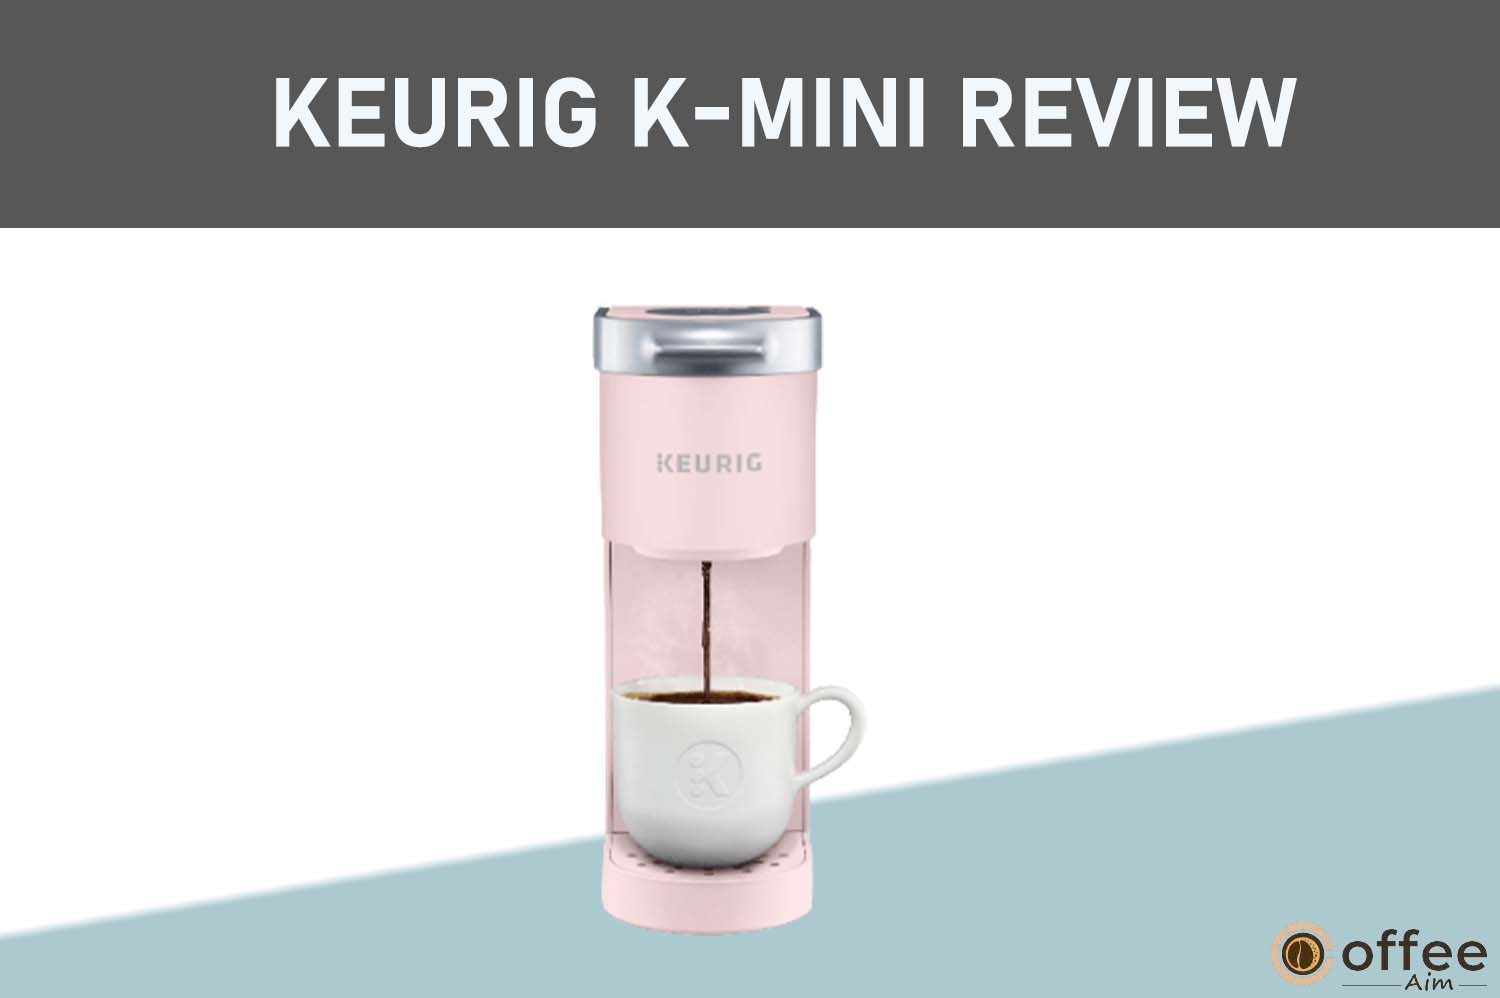 Featured image for the article "Keurig K-Mini Review"